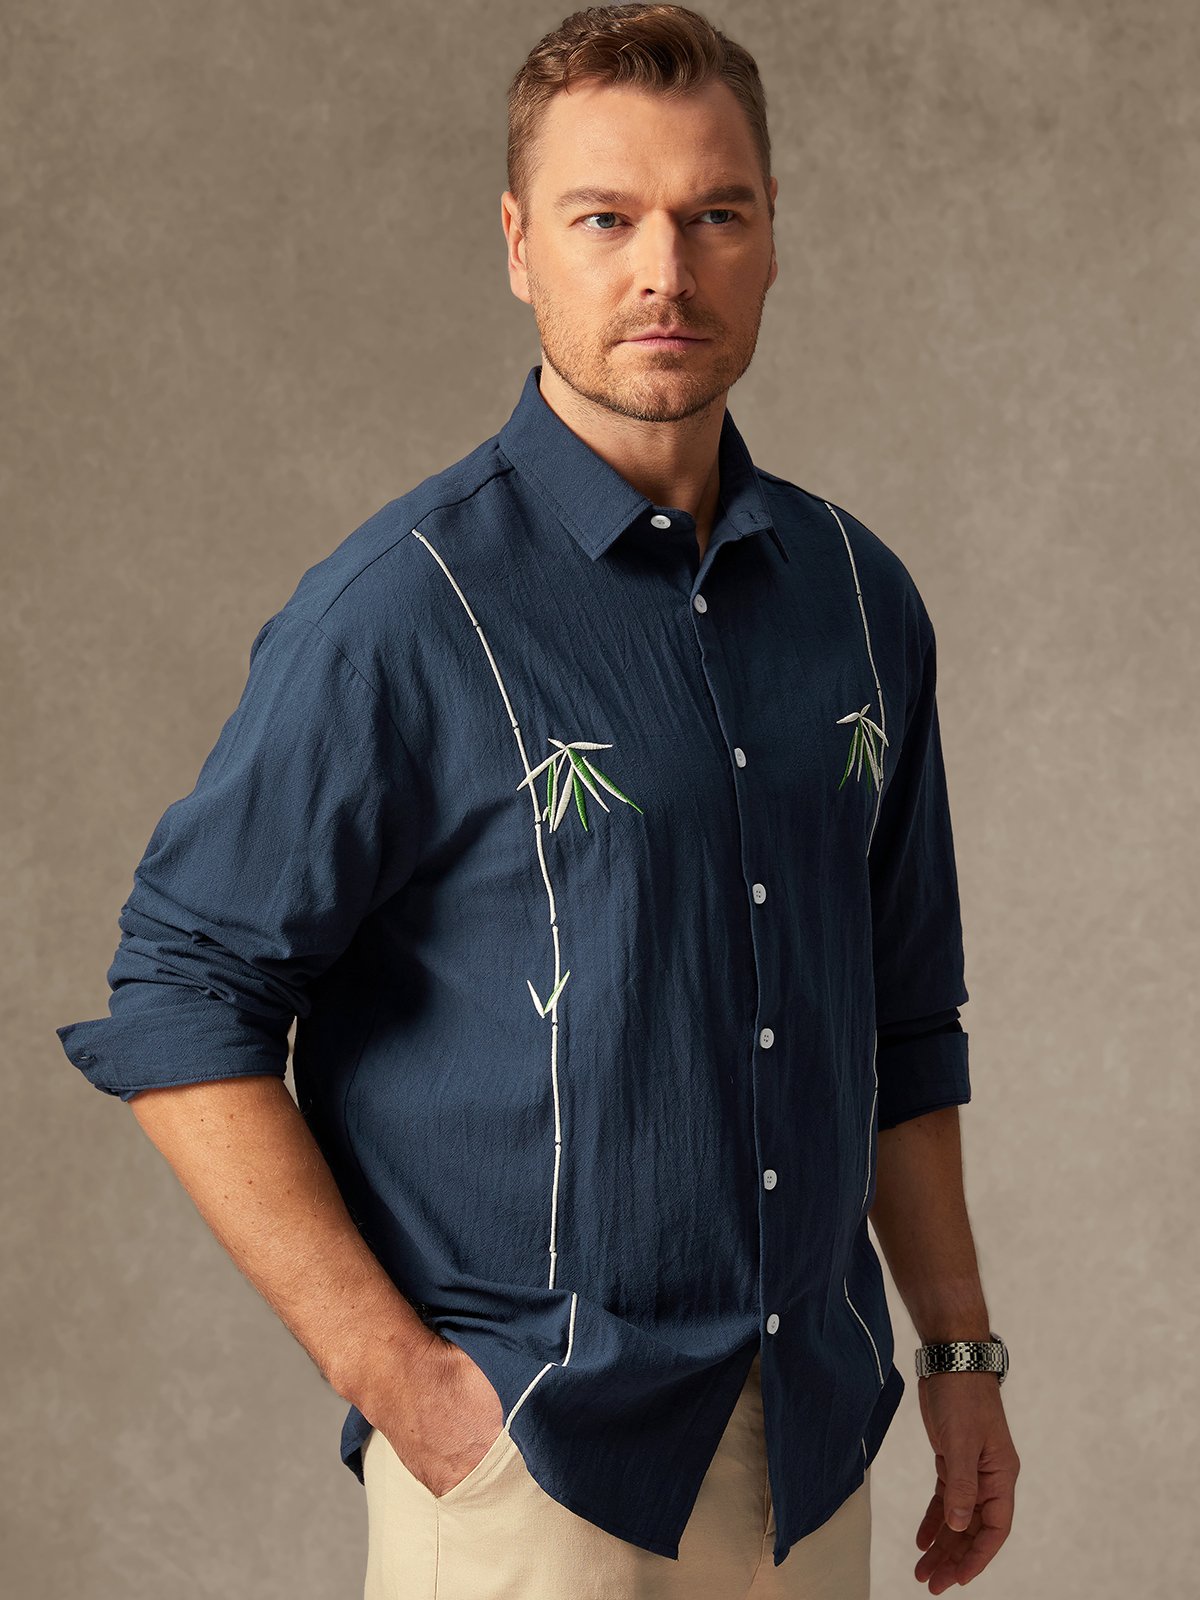 Hardaddy Cotton Bamboo Embroidered Long Sleeve Casual Shirt